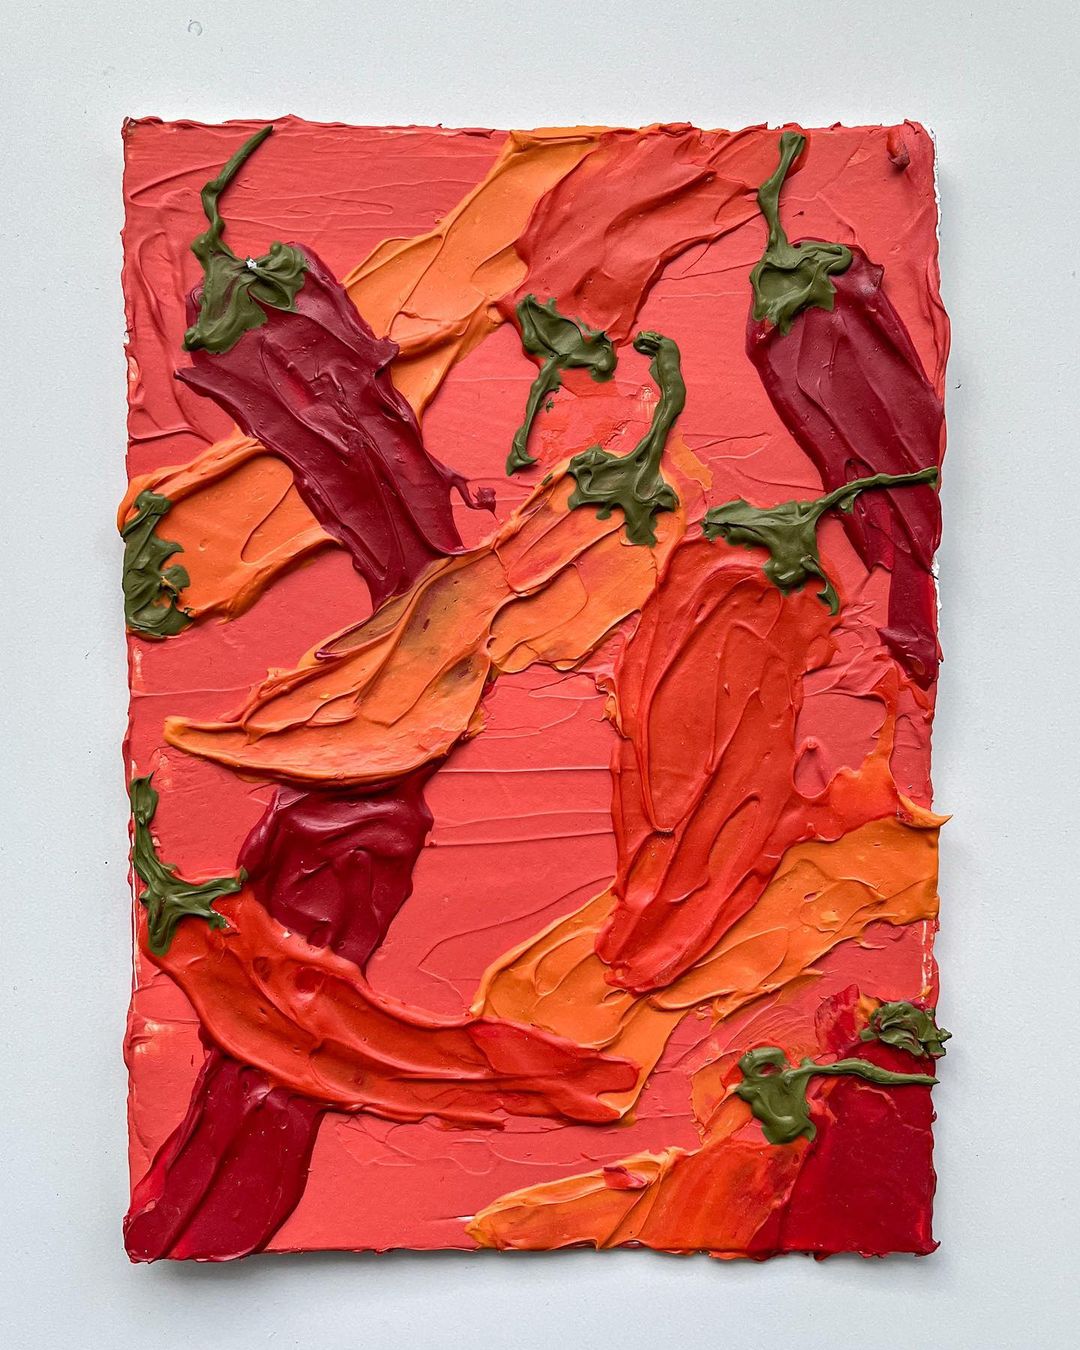 17. A textured acrylic painting of various chillis in red and orange.